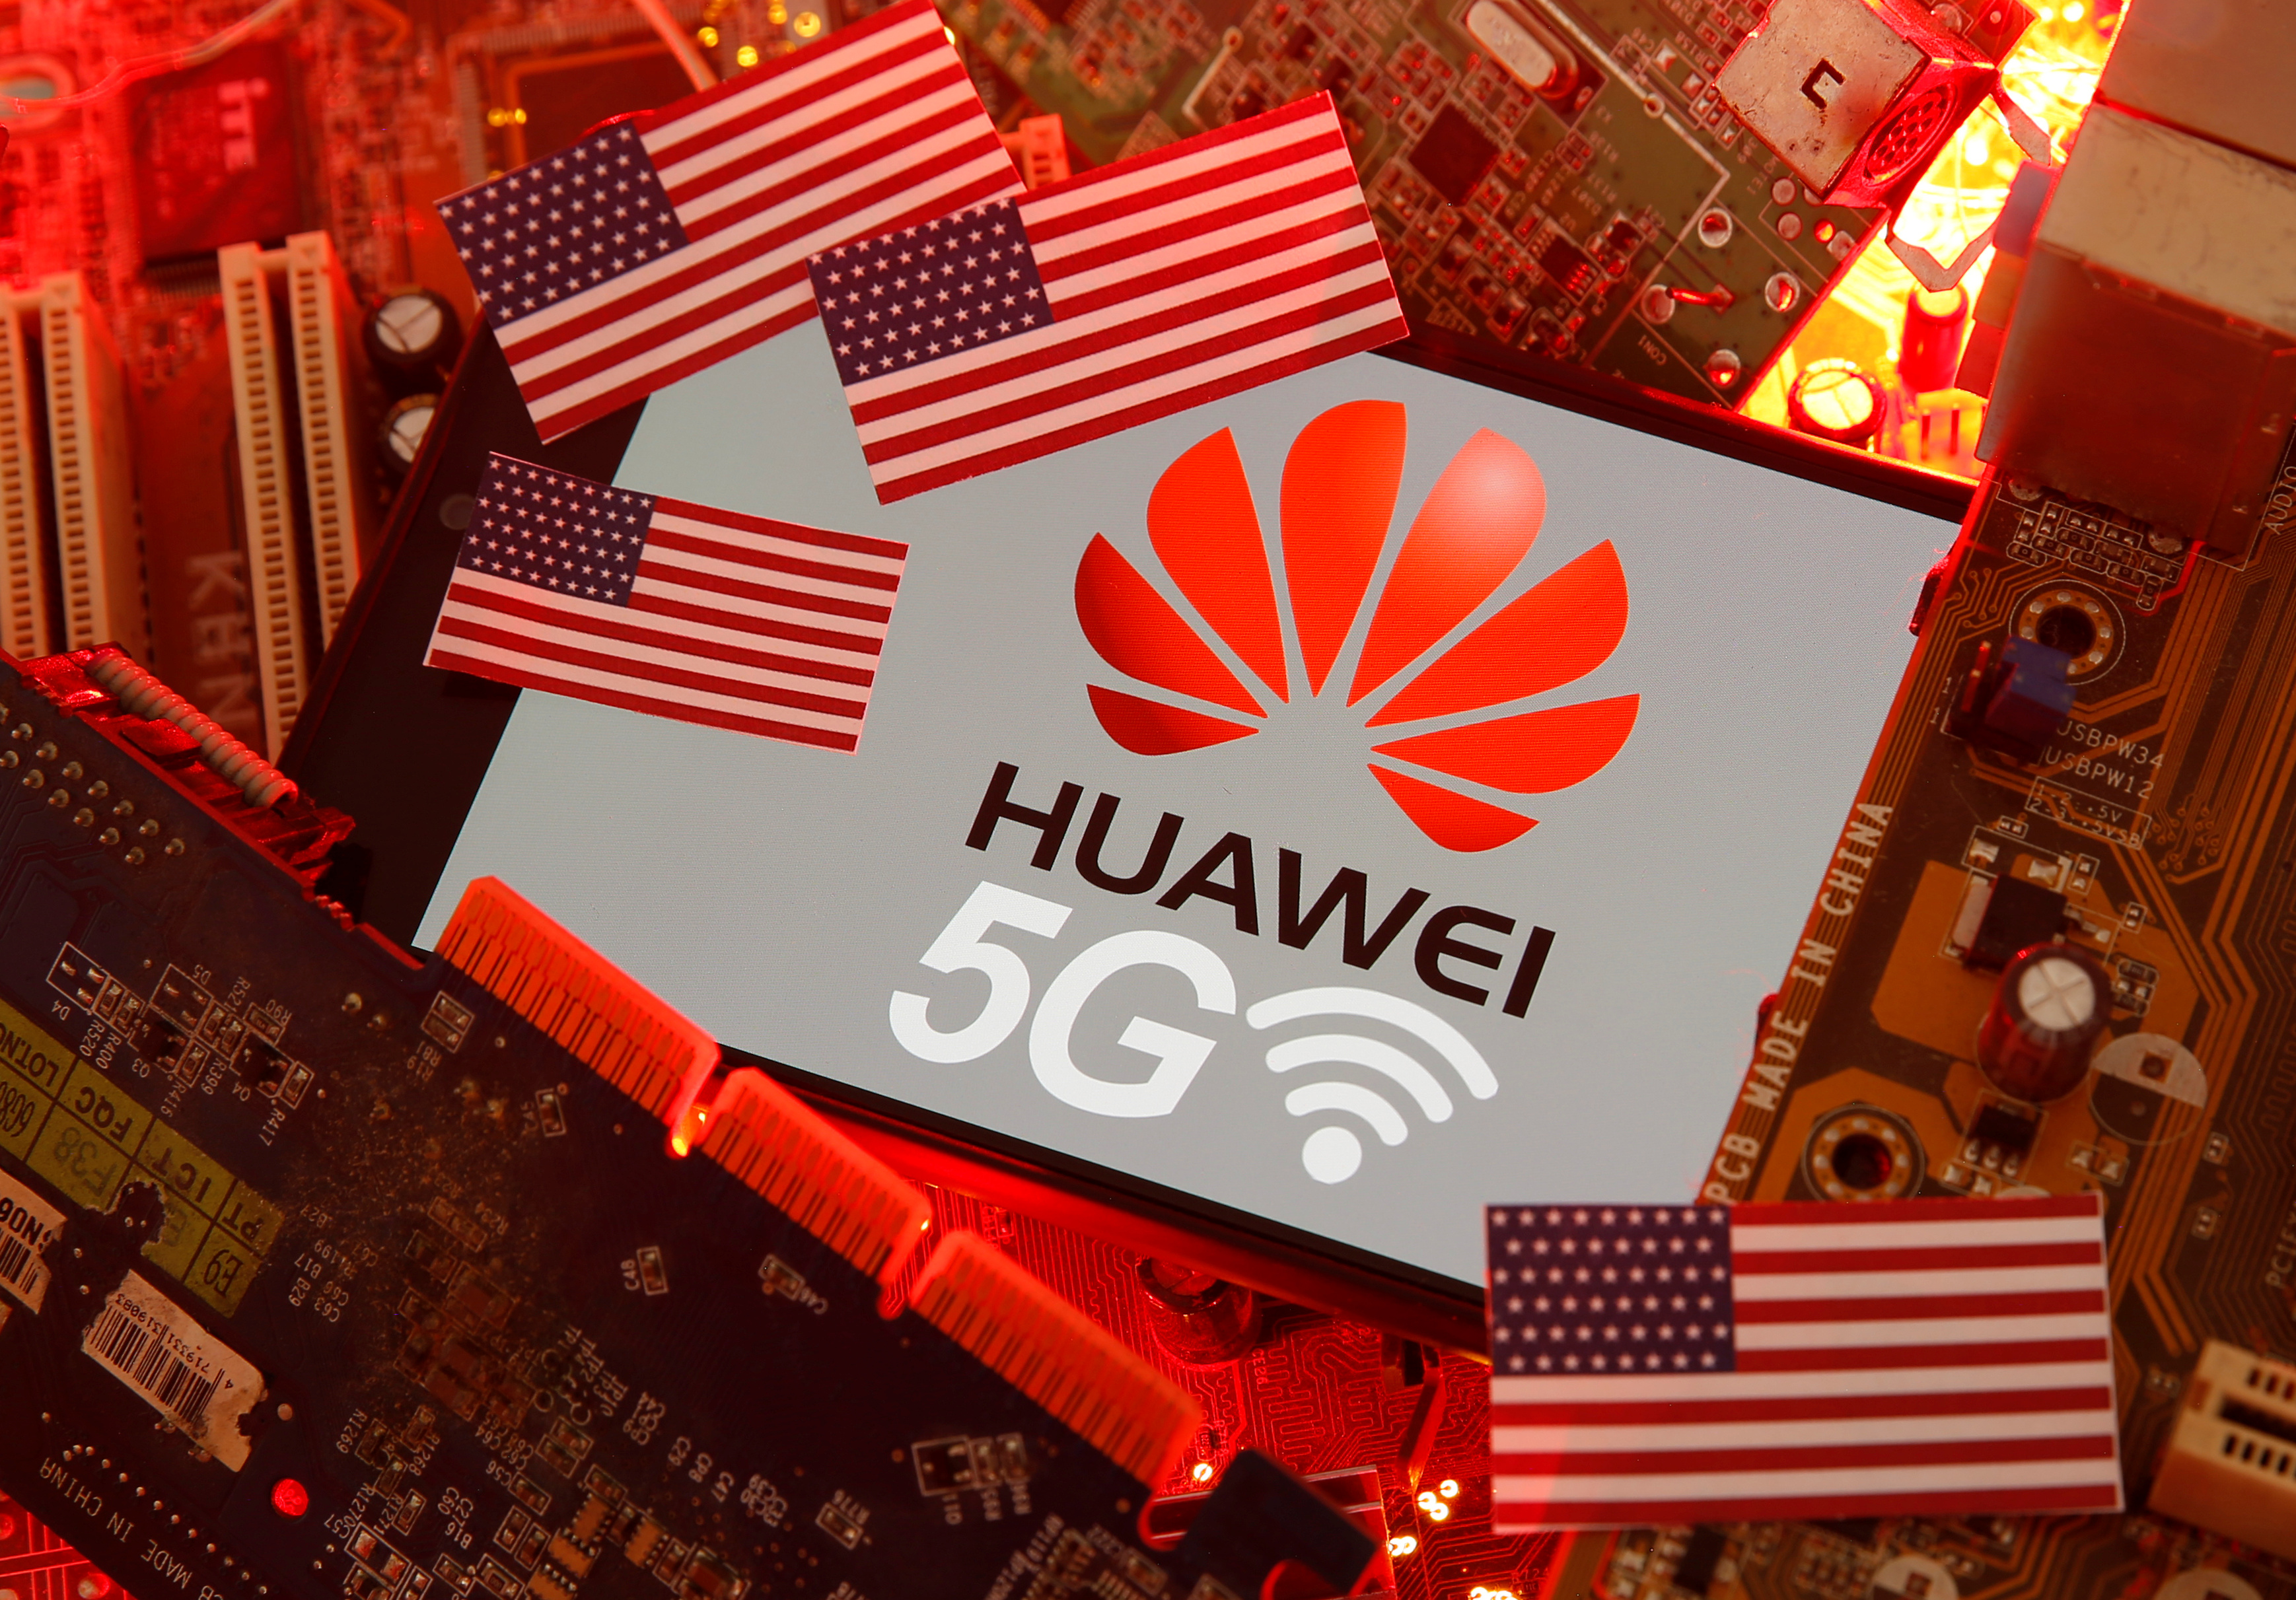 The U.S. flag and a smartphone with the Huawei and 5G network logo are seen on a PC motherboard in this illustratio